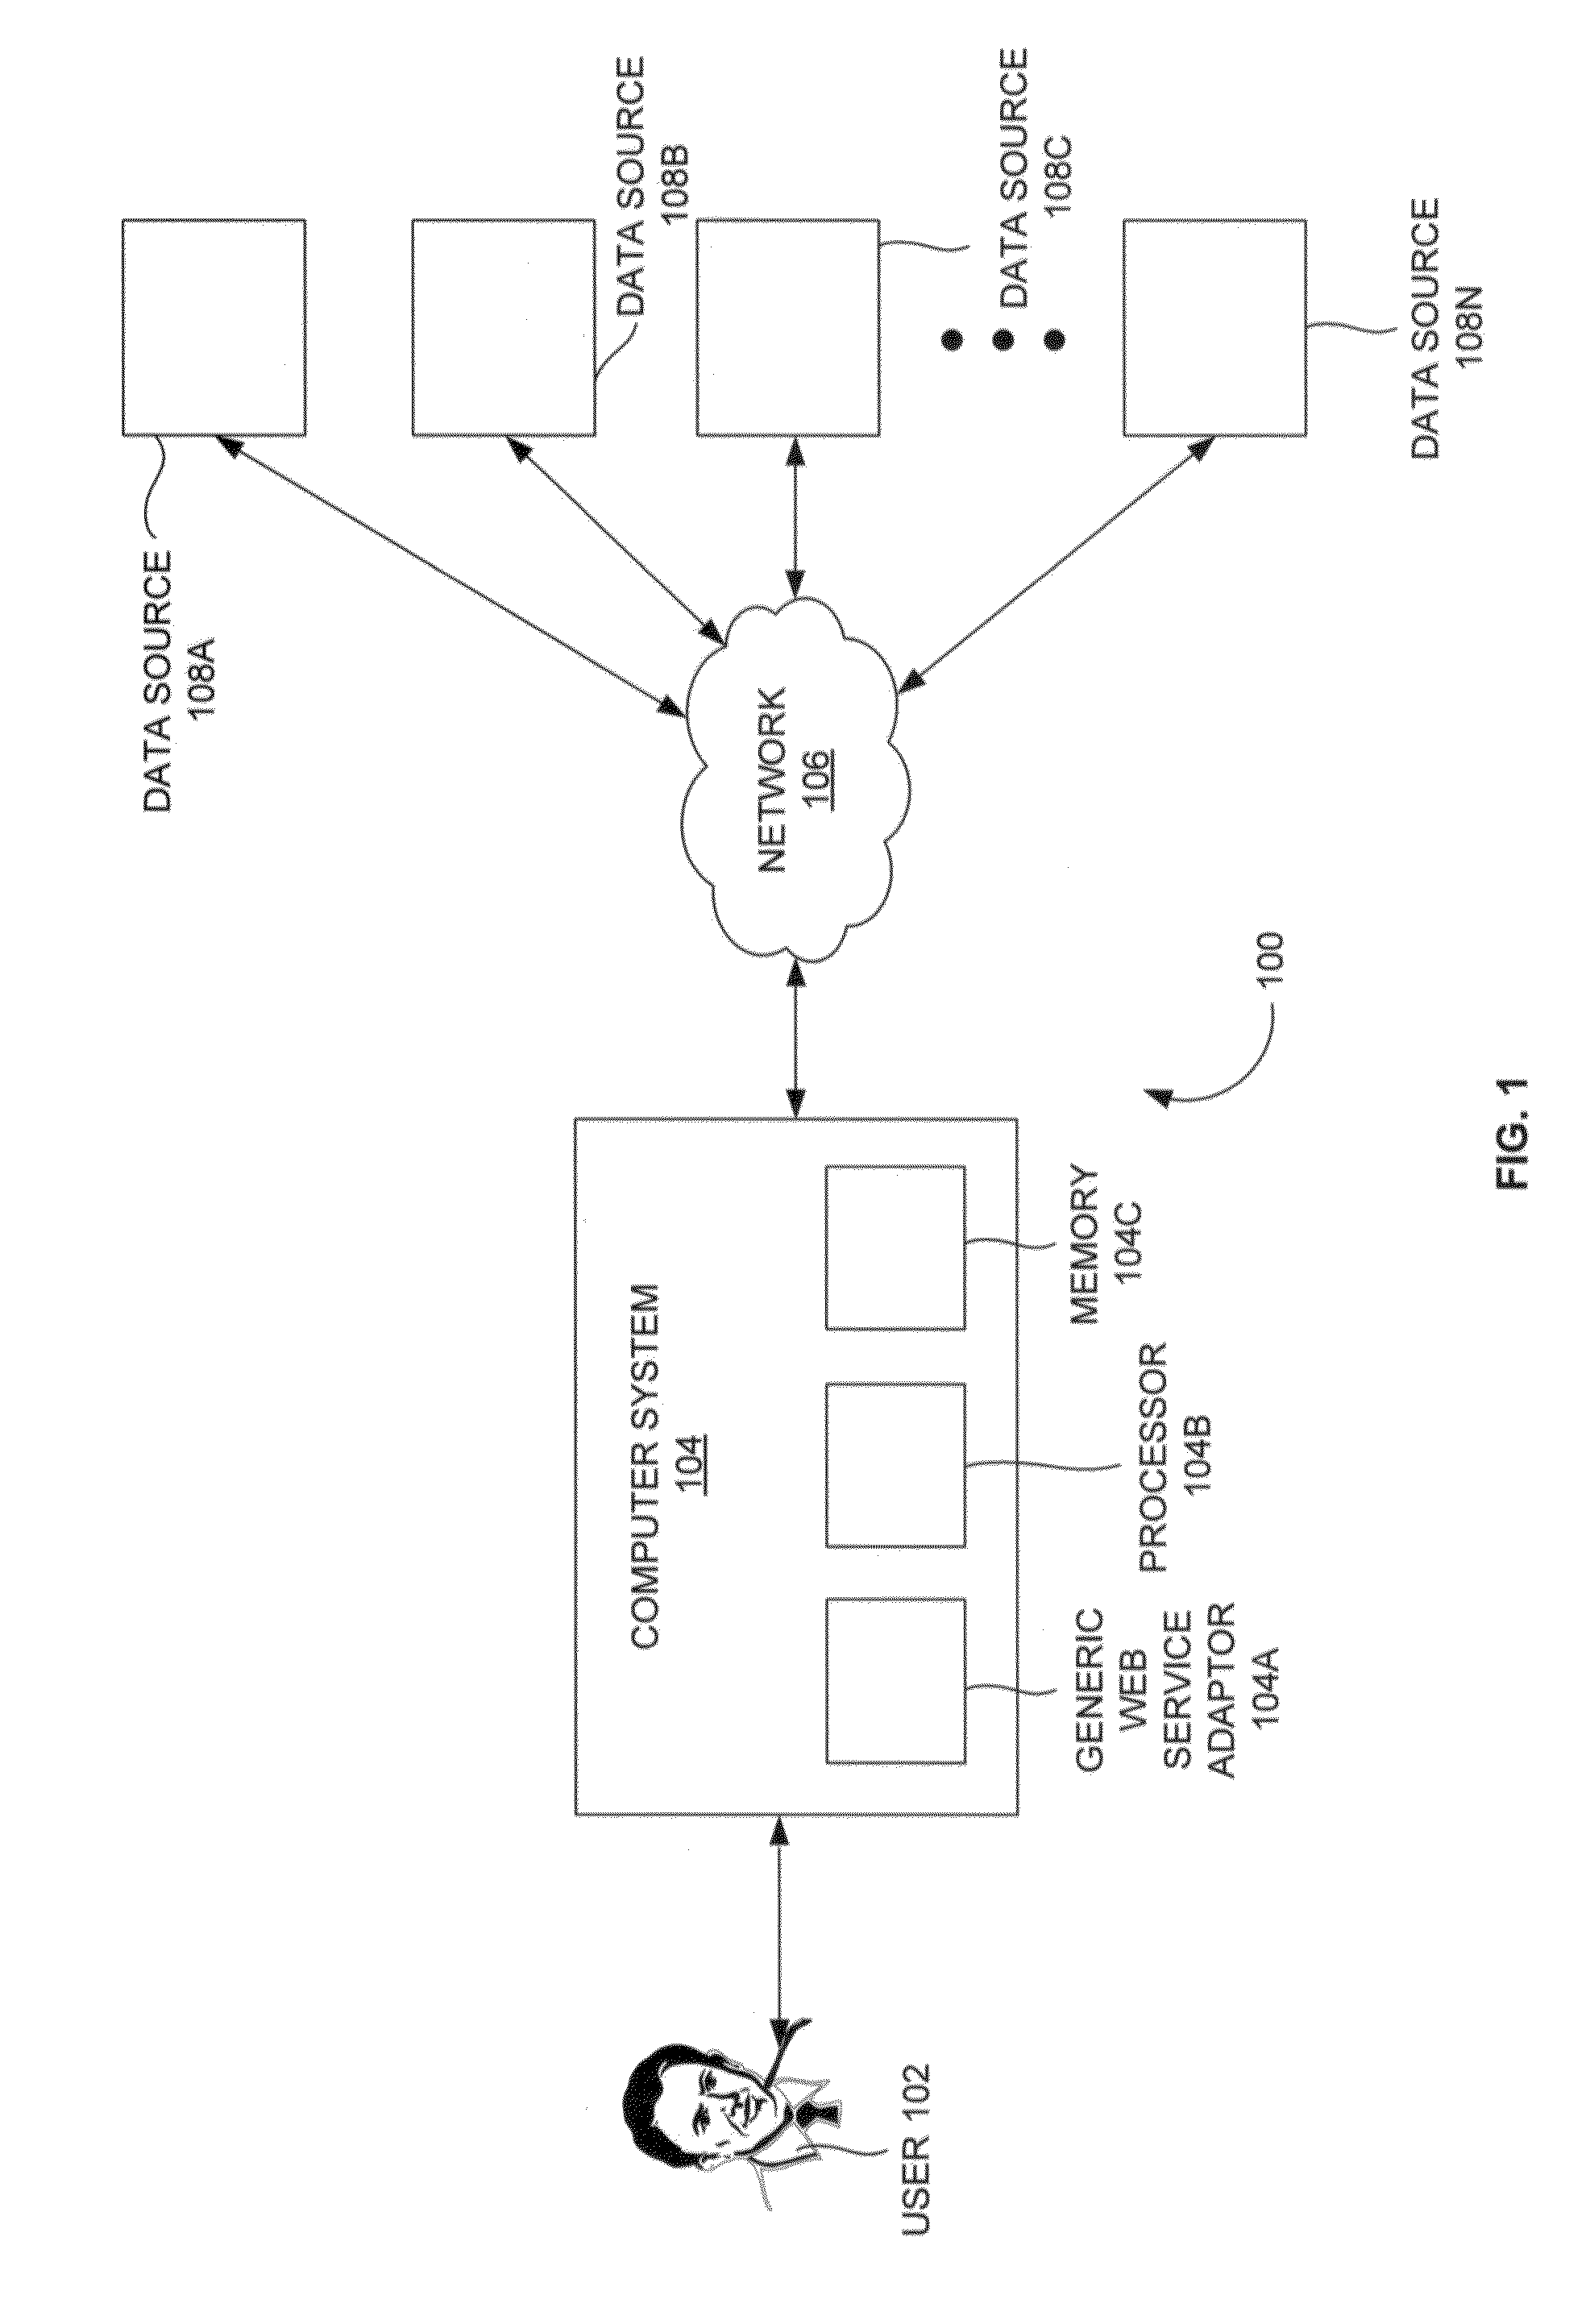 Generic web service adaptor for performing web service operations for multiple web service providers